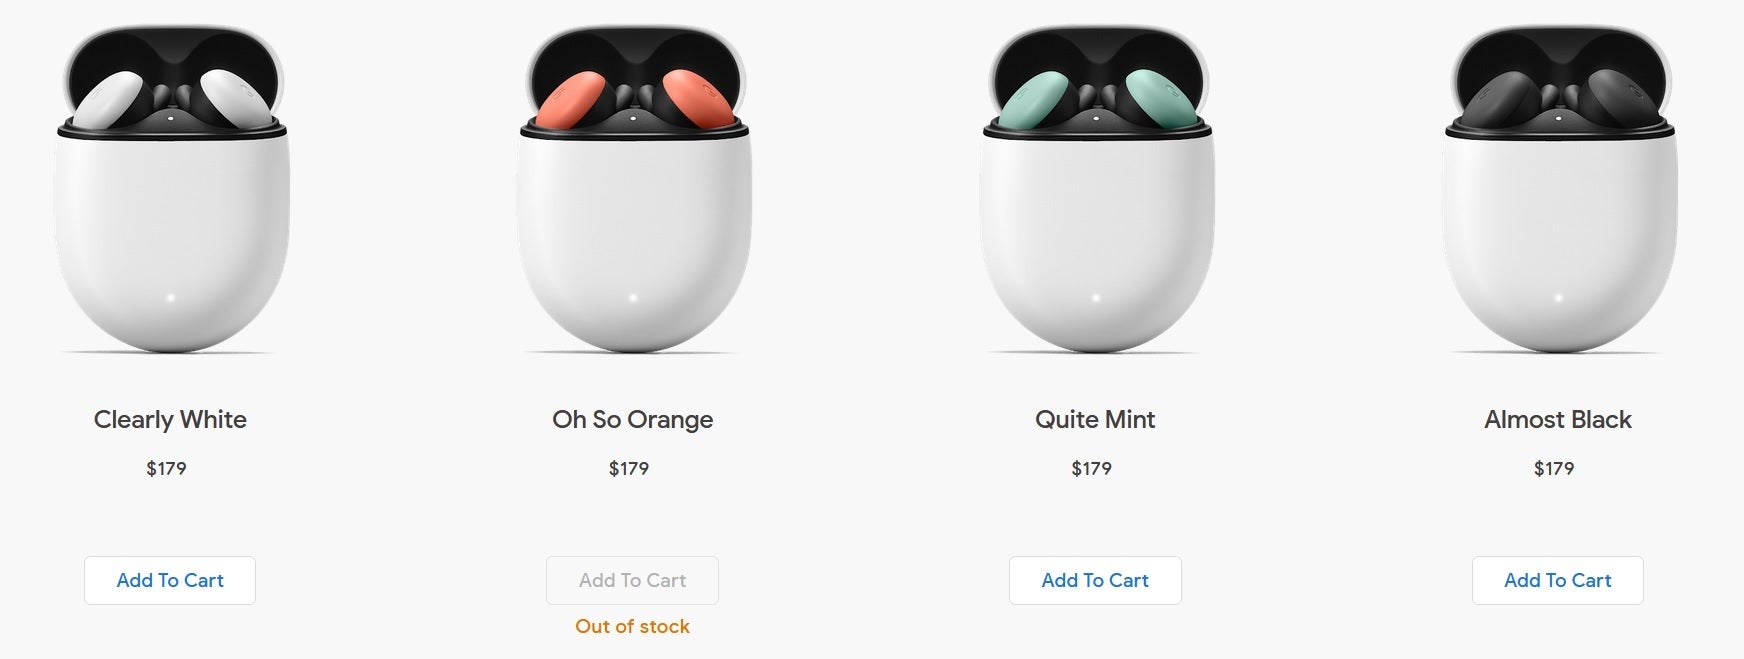 The Oh so Orange Google Pixel Buds are no longer available - Google discontinues one of the Google Pixel Buds' color options